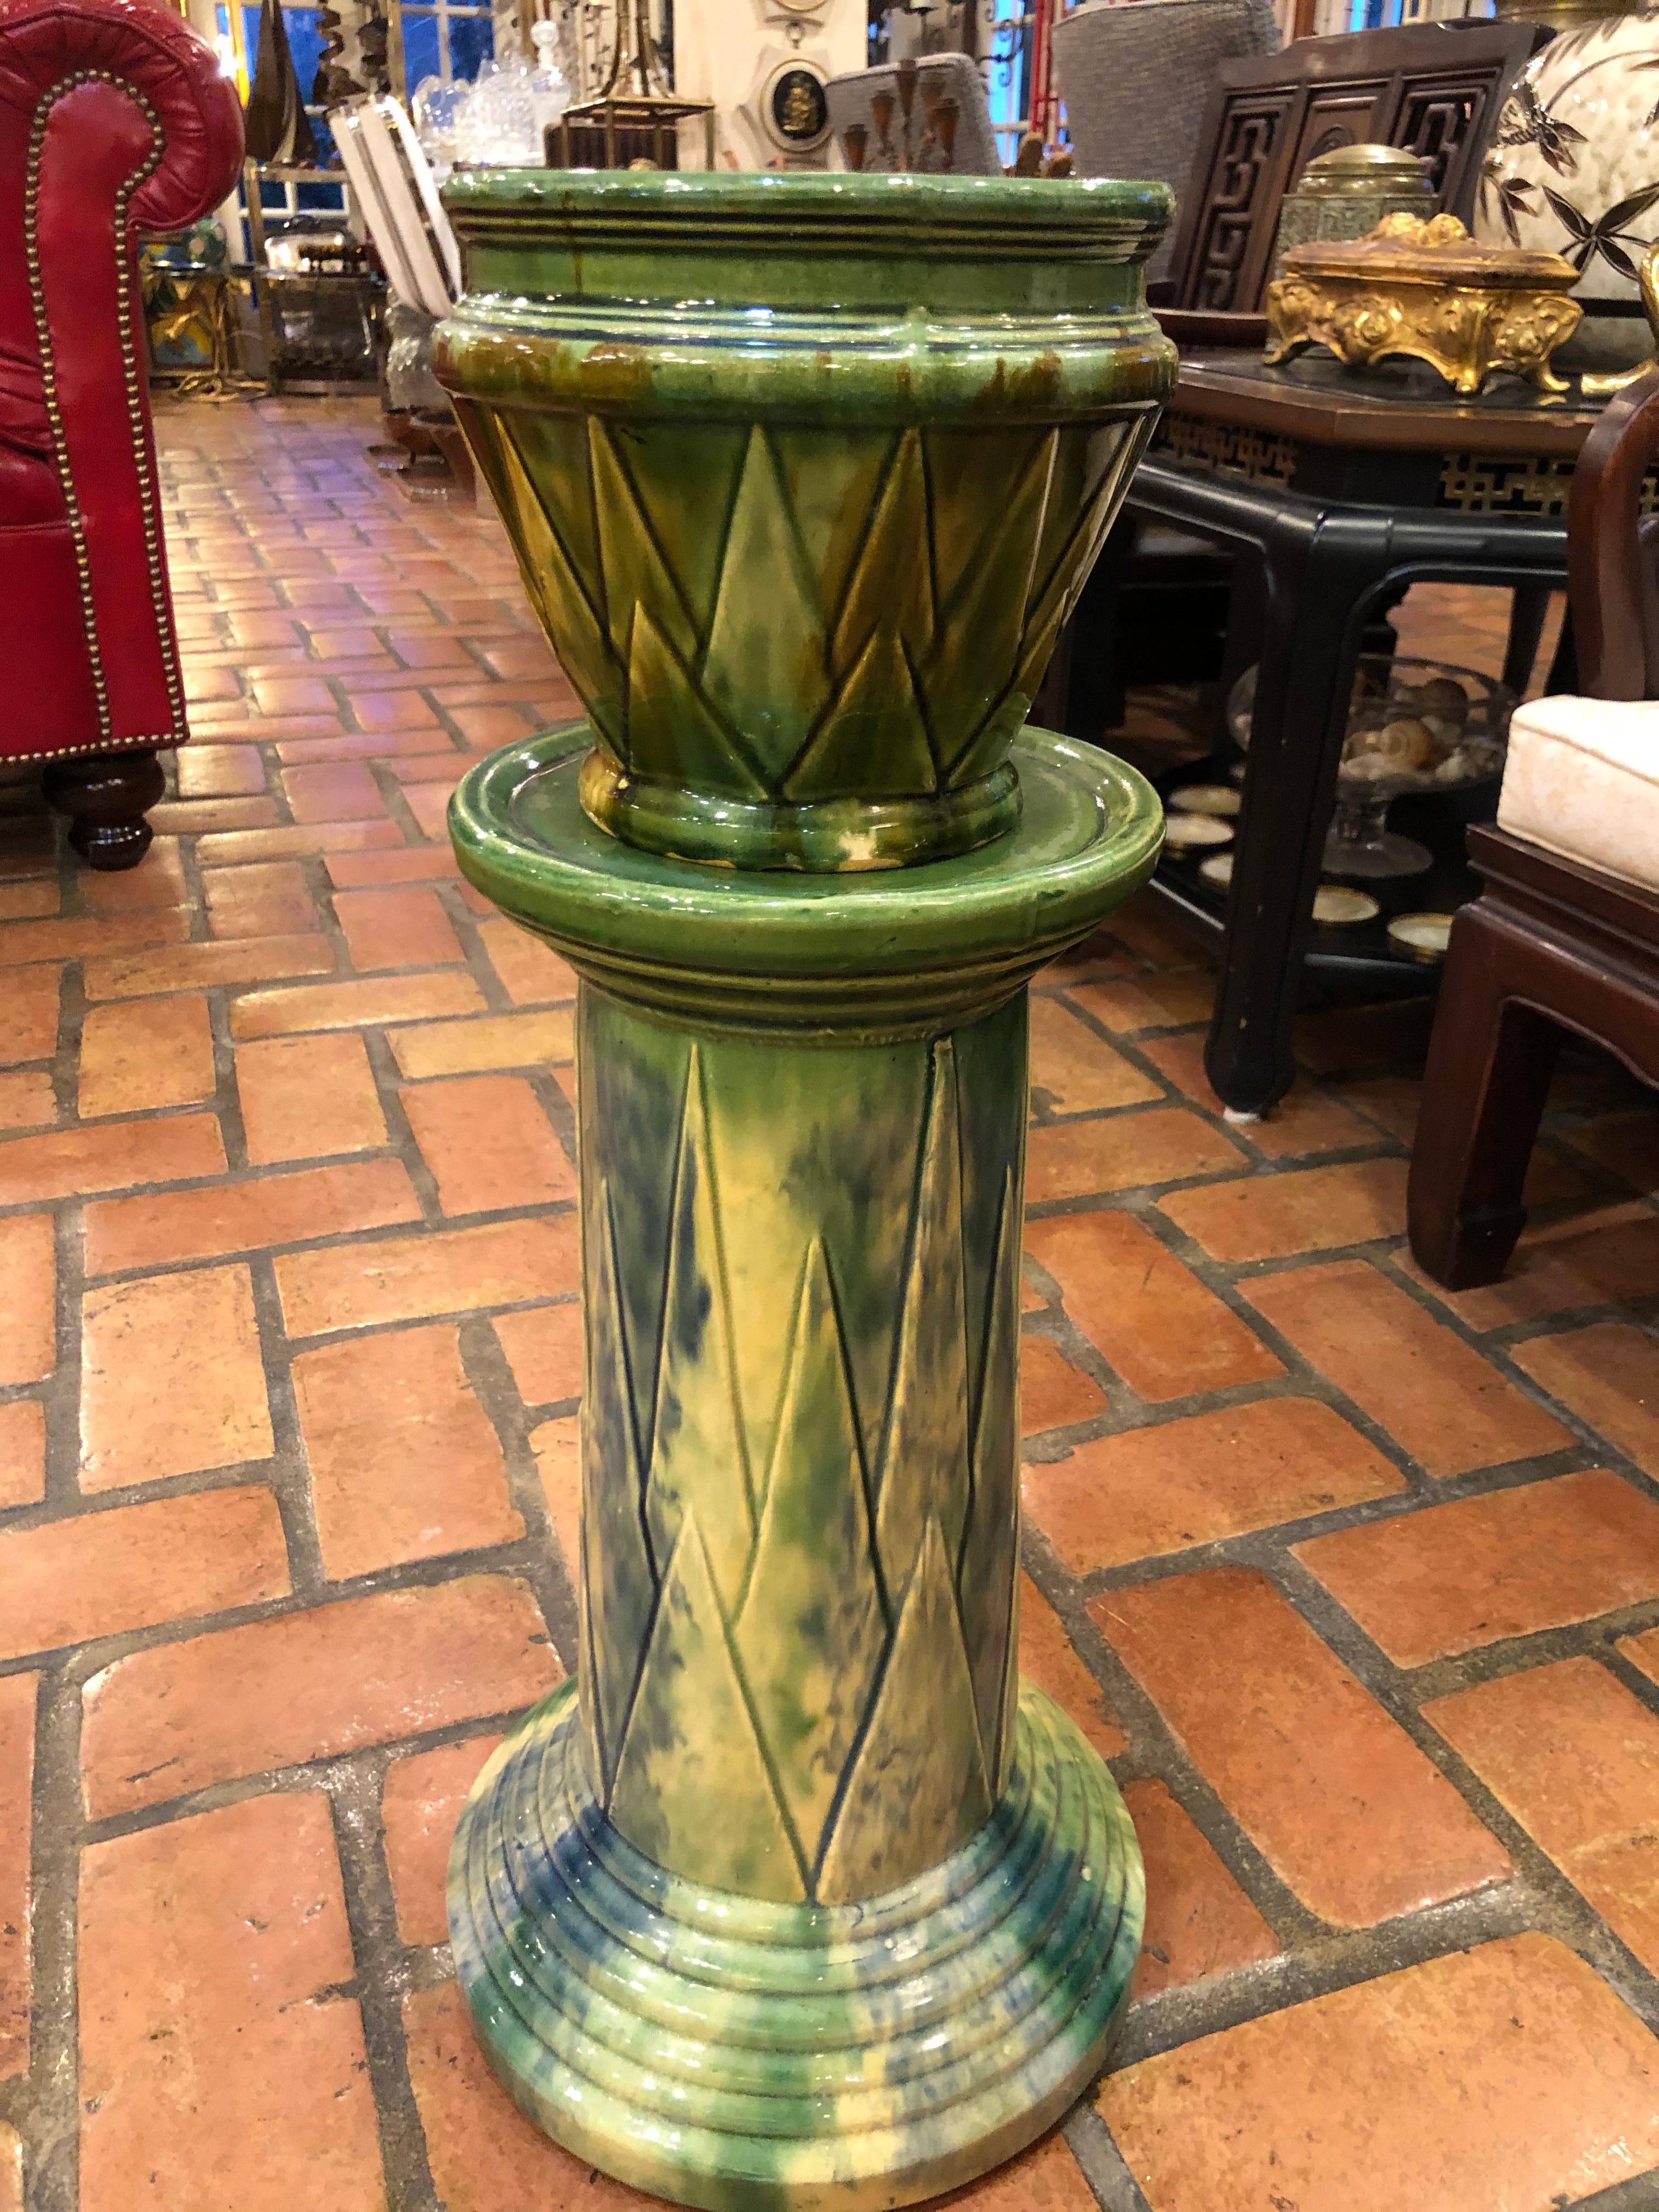 American Art Deco Pottery vase pedestal. Lovely green and turquoise rare pedestal by McCoy Pottery. Blended glaze, PV187.
There is a matching pot included although it is not the correct size in scale .It is smaller that what the size should be.